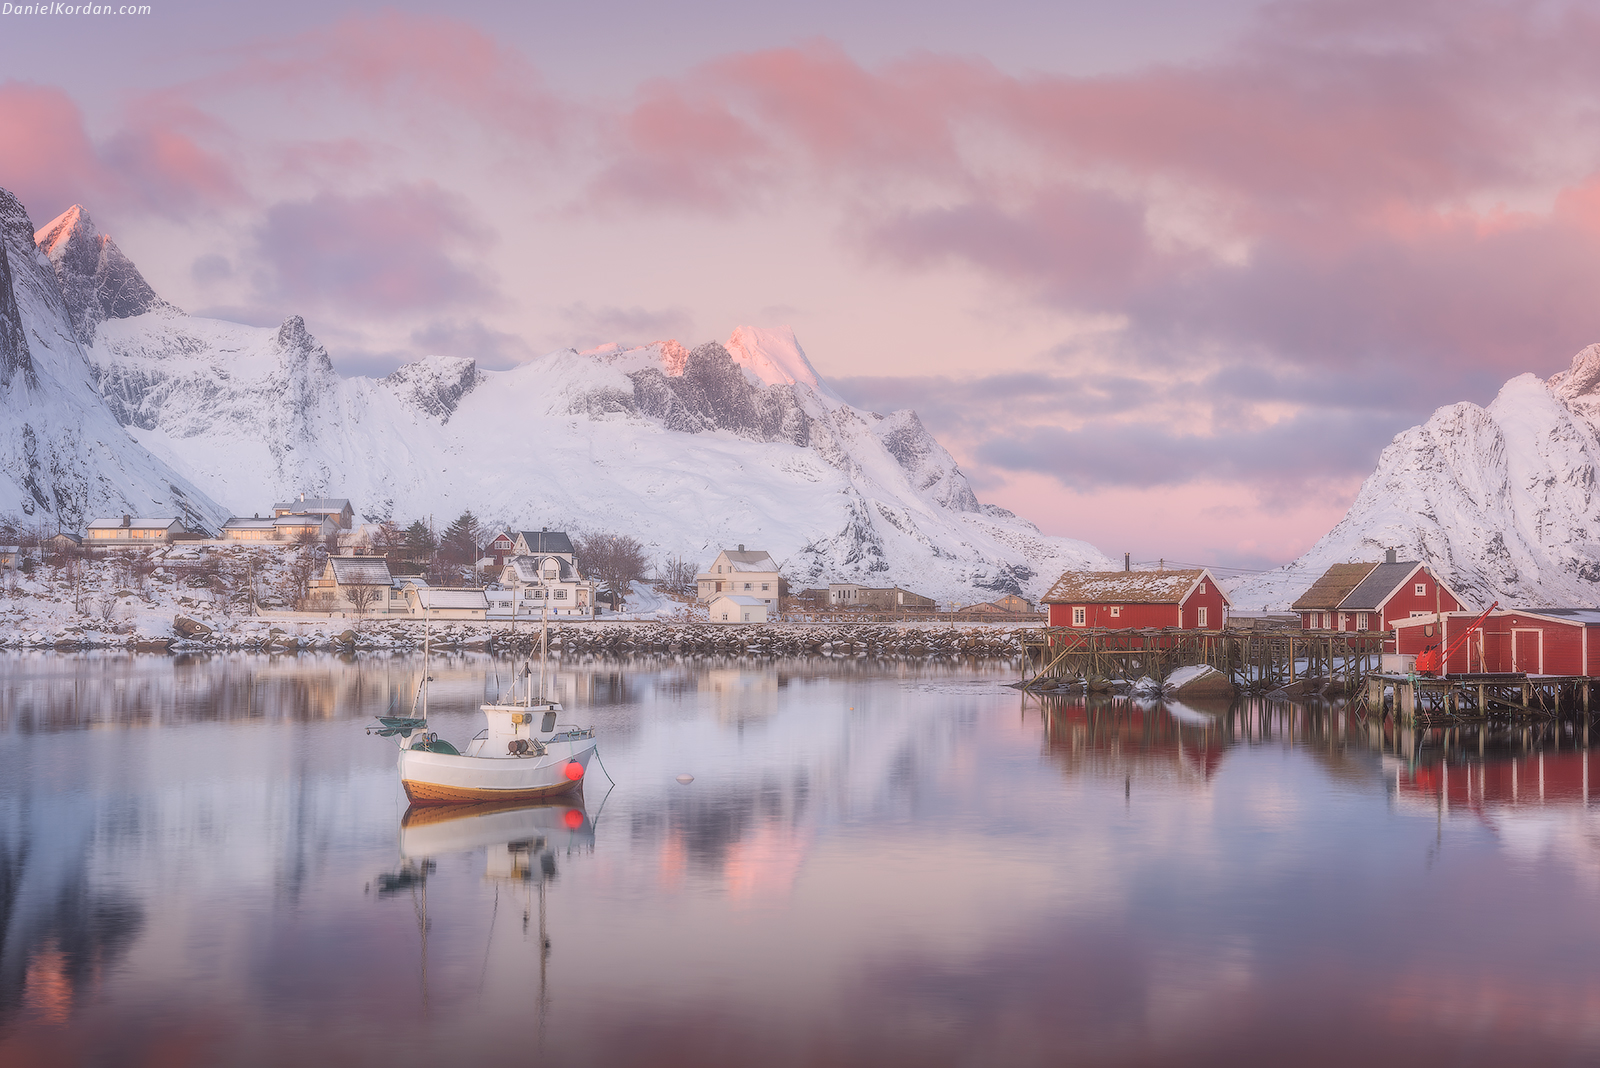 15 Photos That Will Make You Want to Visit Northern Norway